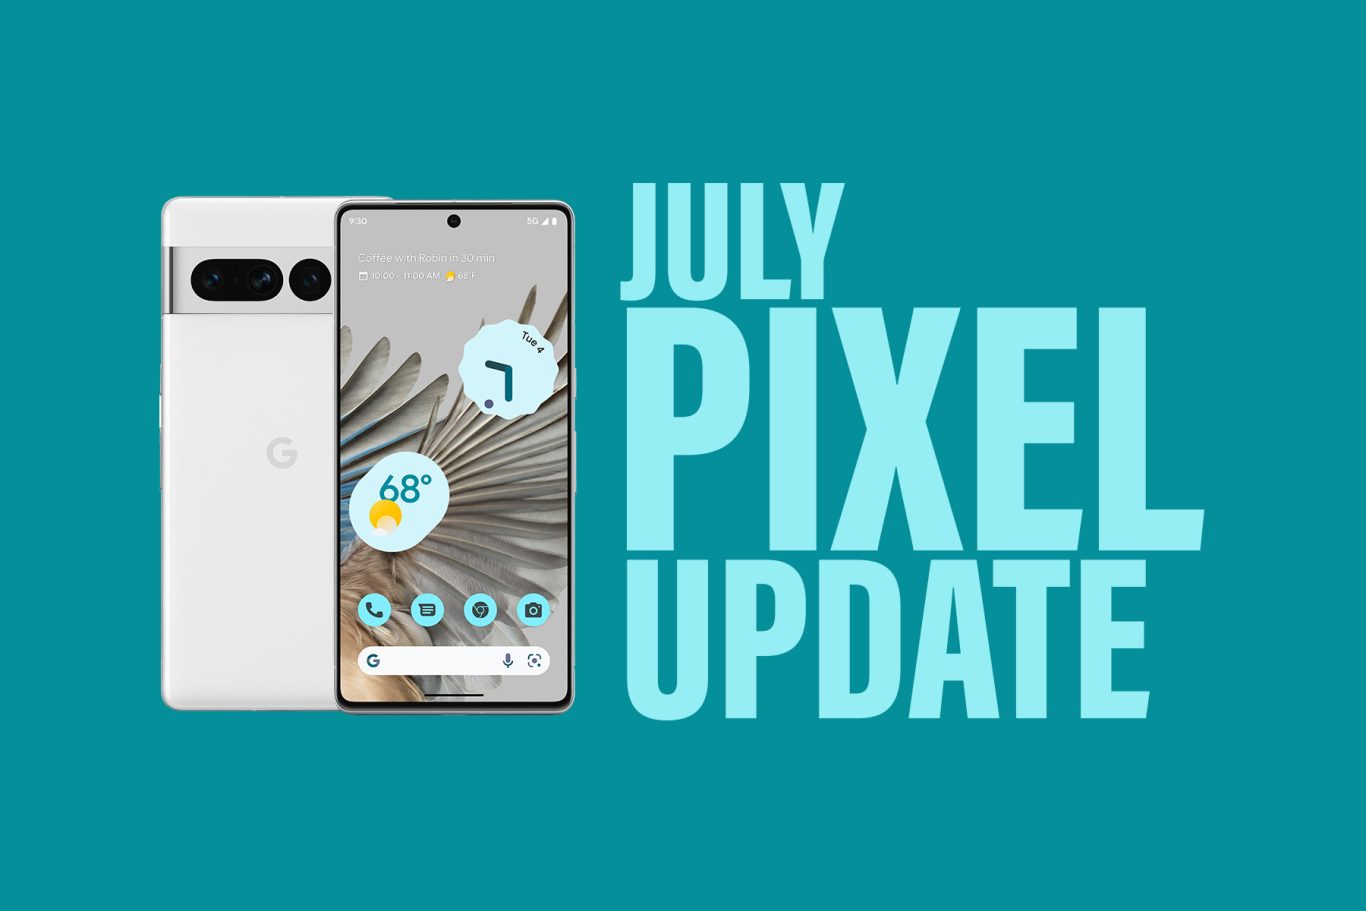 Your Google Pixel Phone's July Update Arrived